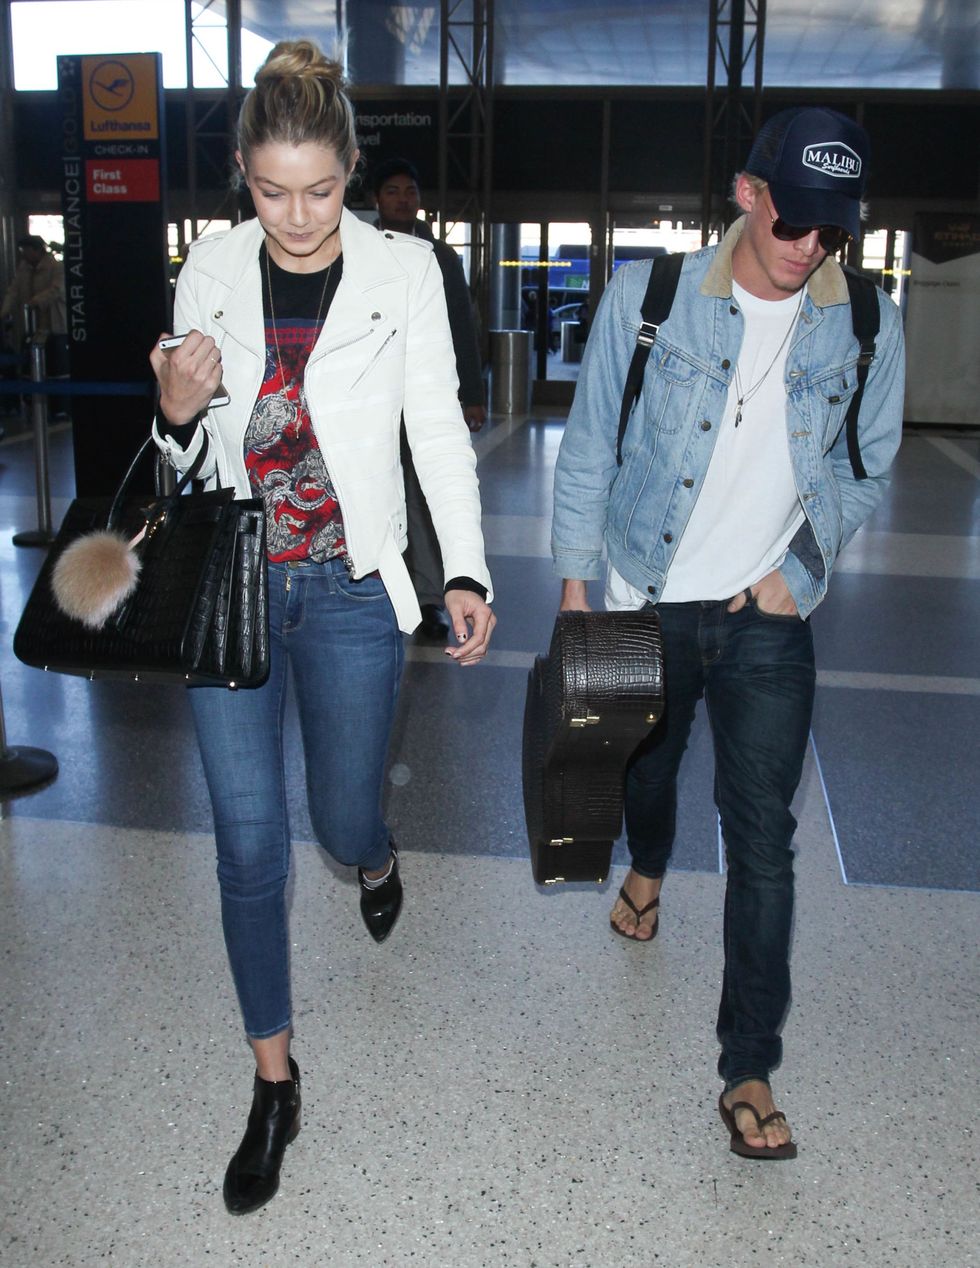 LOS ANGELES, CA - DECEMBER 27: Cody Simpson and Gigi Hadid are seen at LAX on December 27, 2014 in Los Angeles, California.  (Photo by GVK/Bauer-Griffin/GC Images)